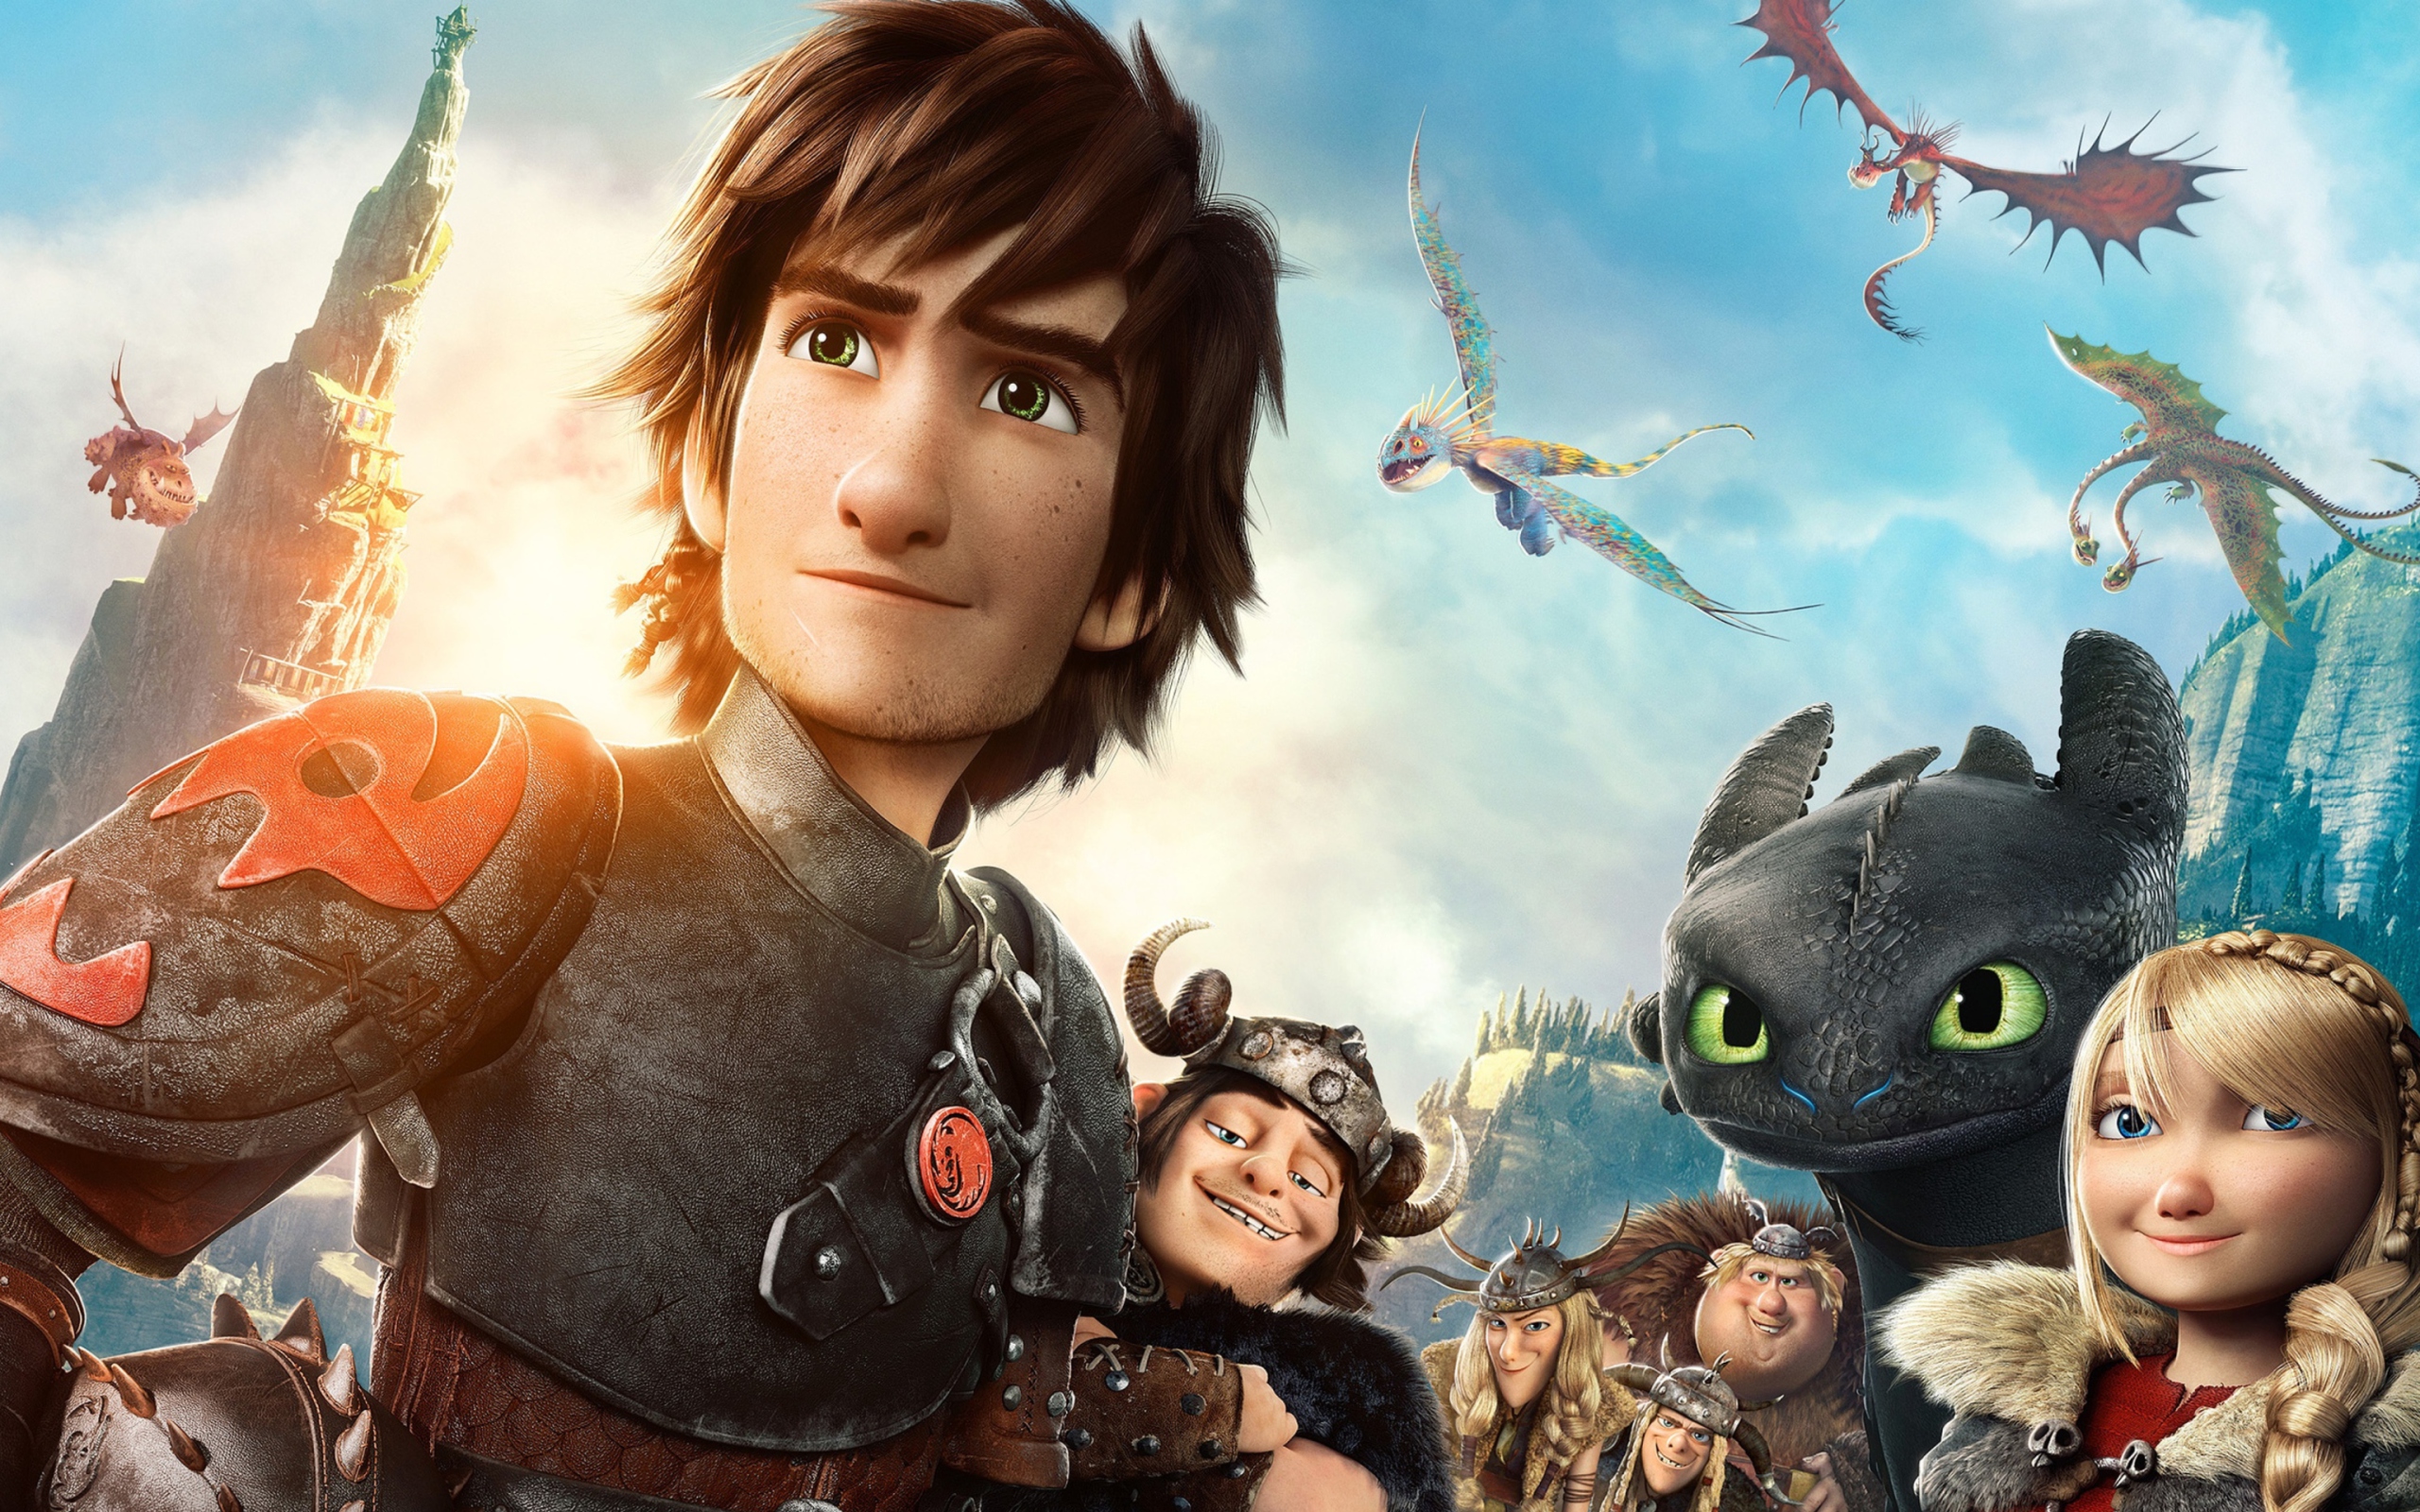 How To Train Your Dragon 2 wallpaper 2560x1600